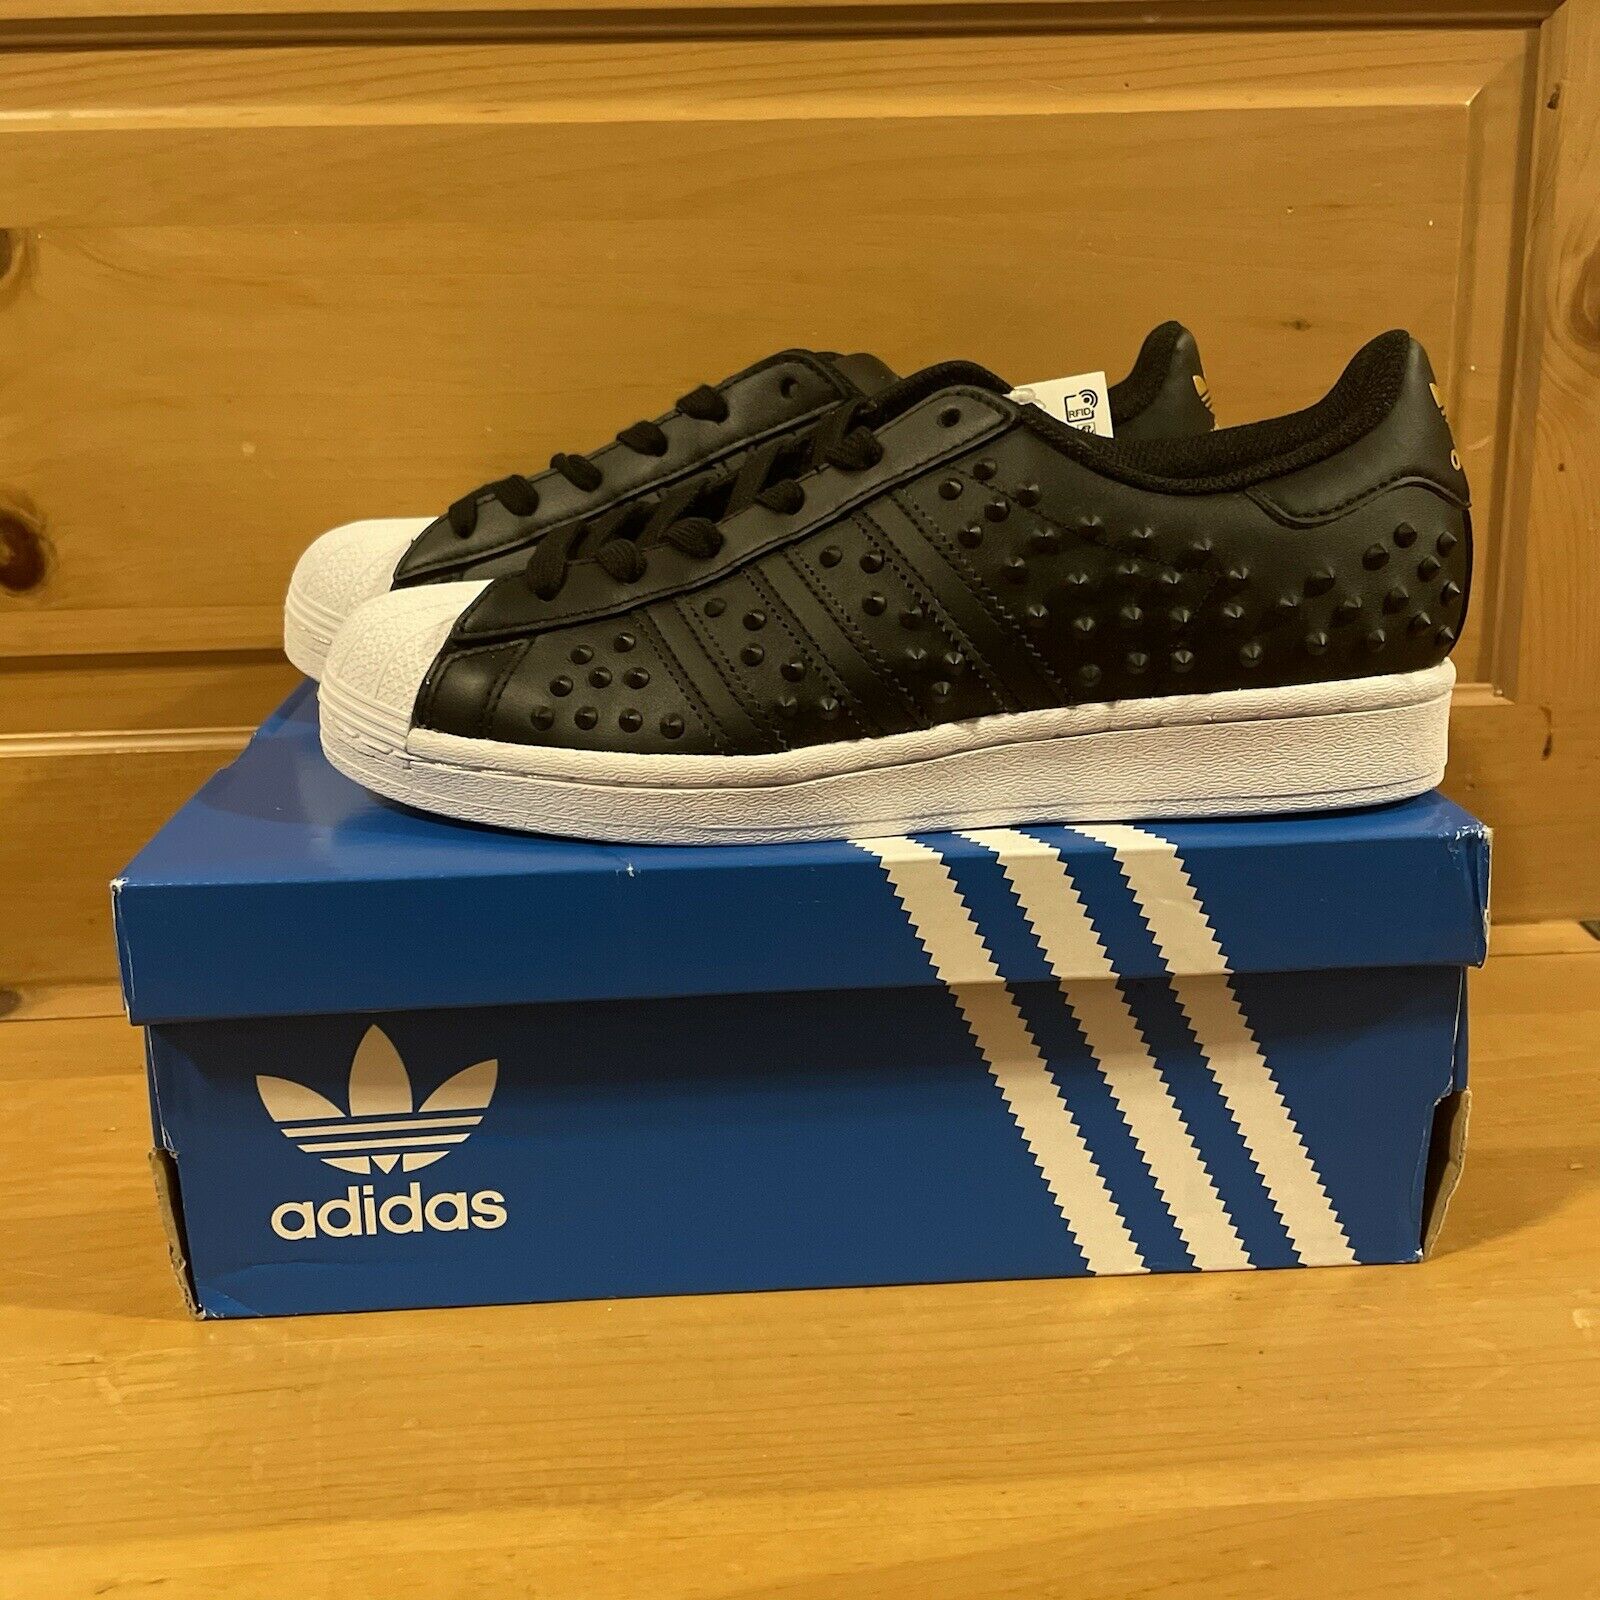 Adidas Women's Originals Superstar FV3398 Black and White Studded Shoes Size 8